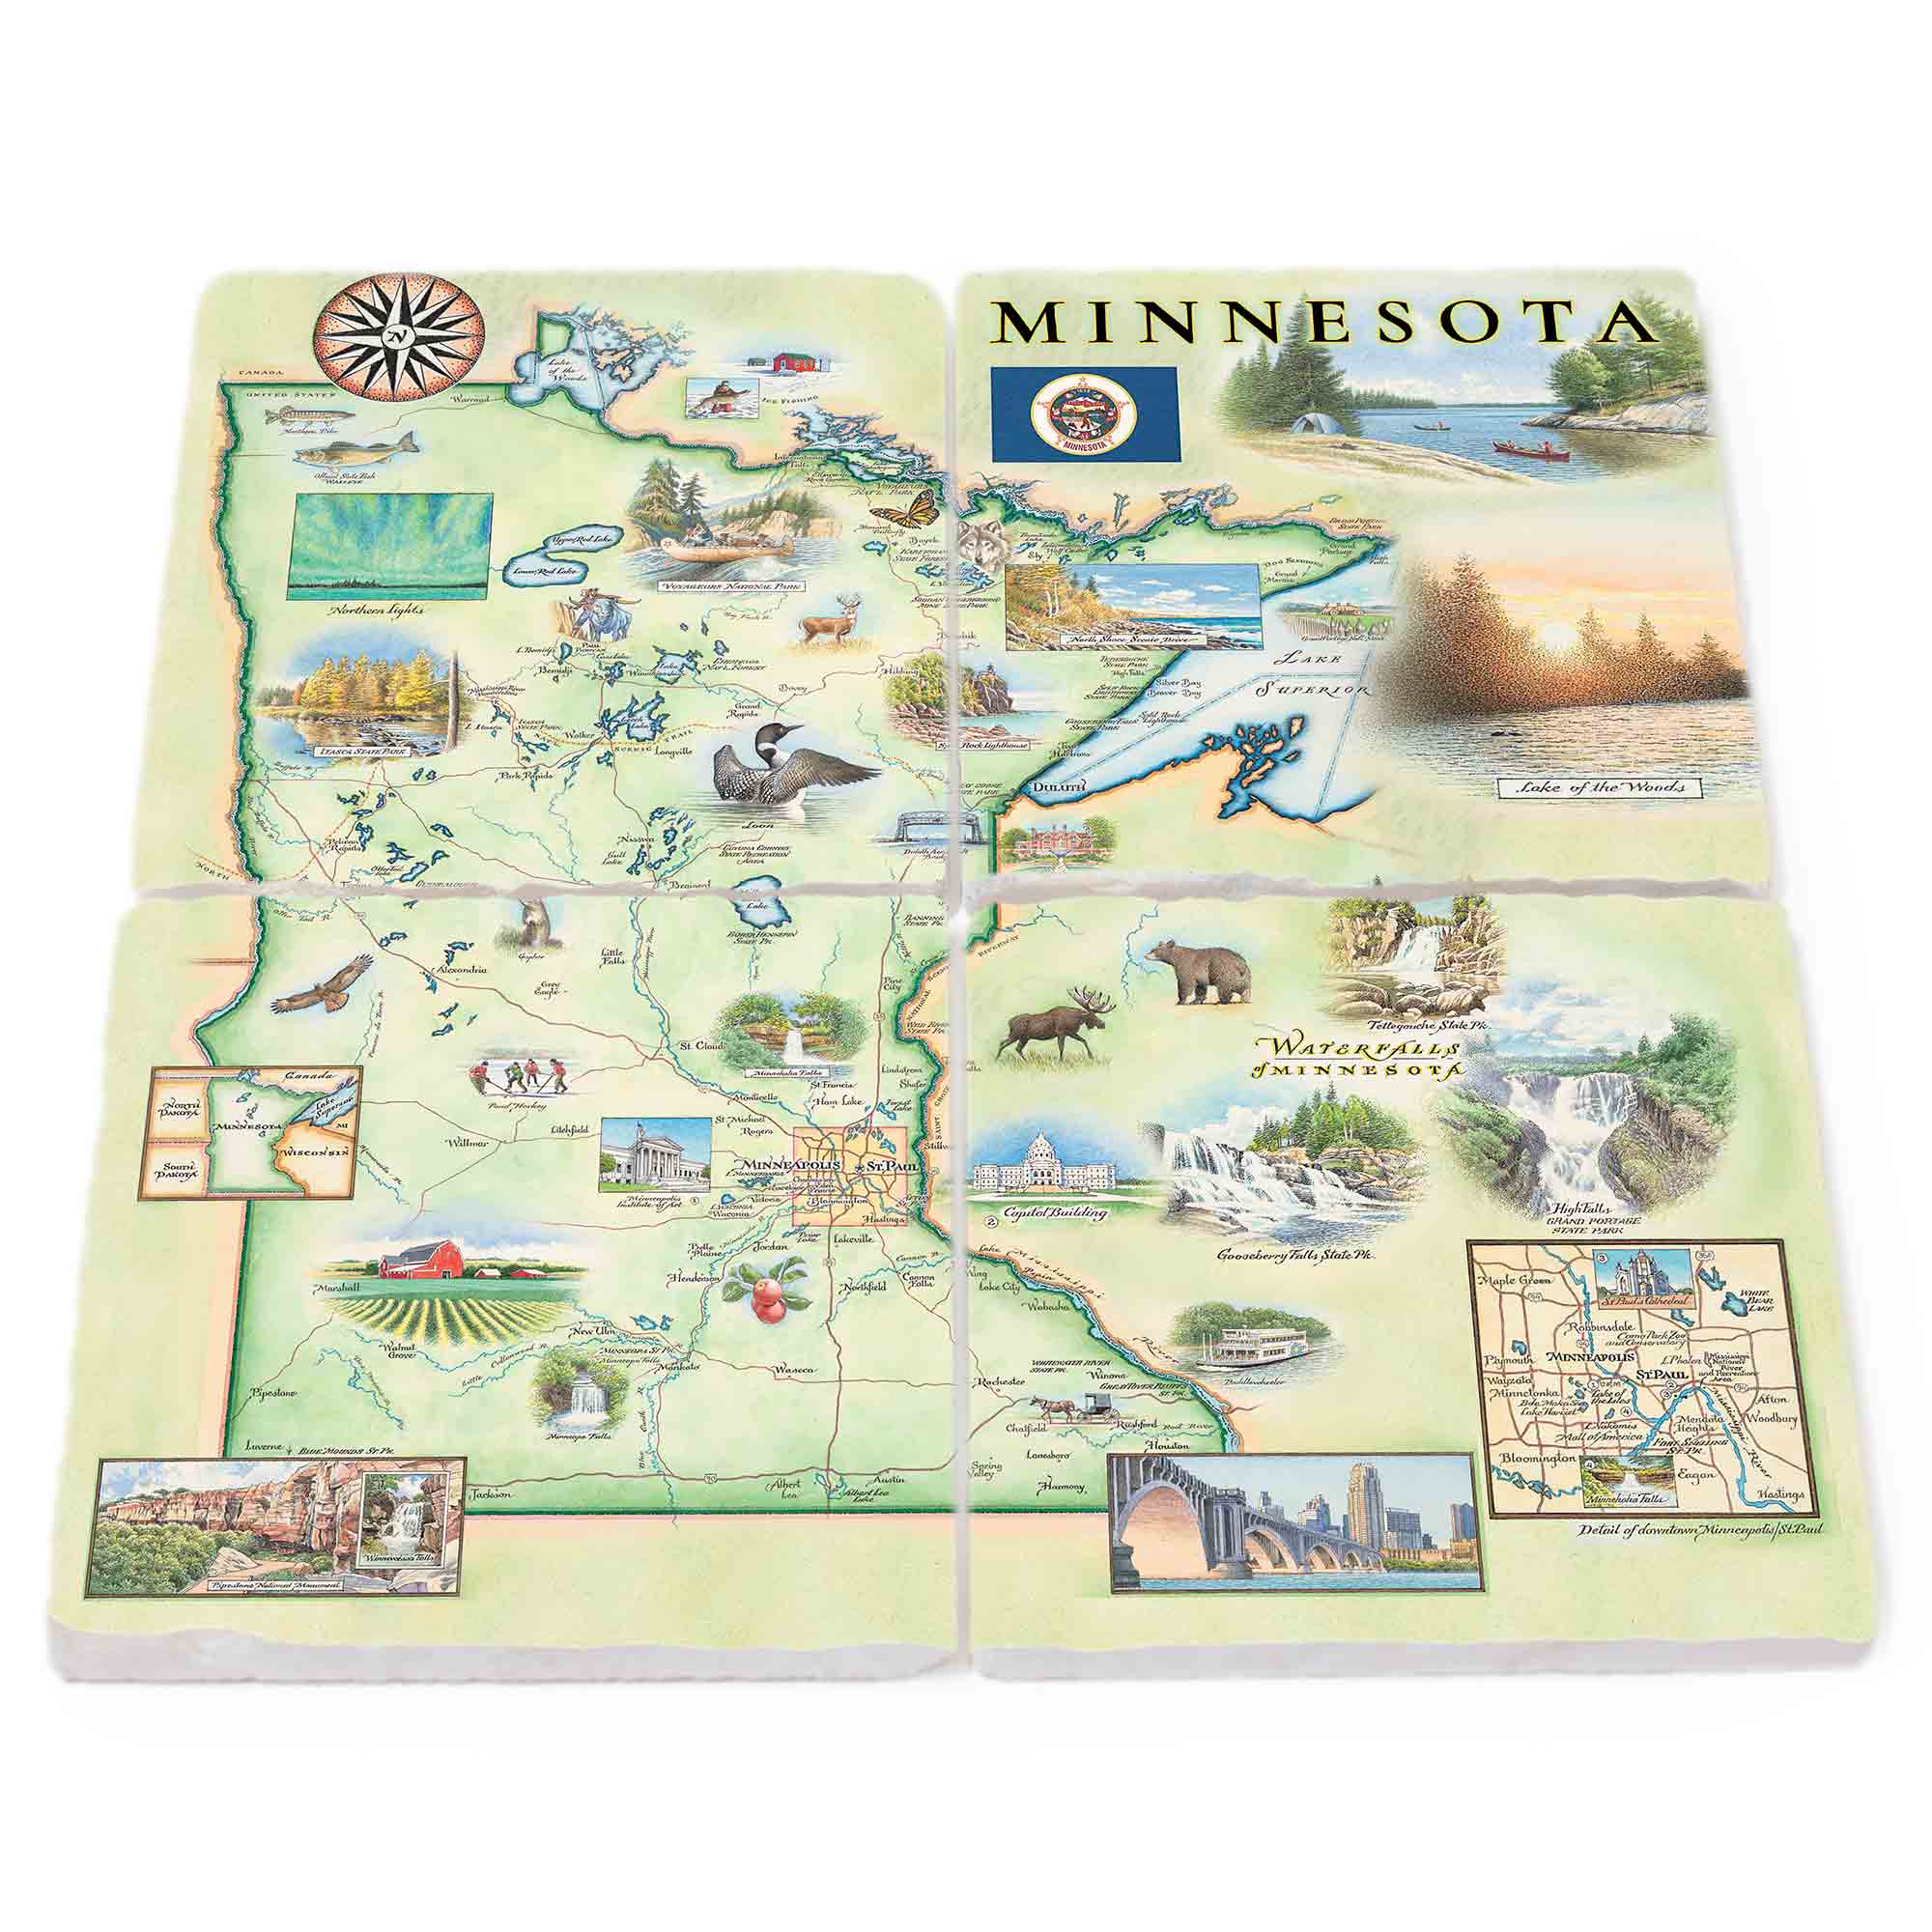 Minnesota Stone Coaster Set set of 4. The map showcases key landmarks including waterfalls, Lake Superior, Lake in the Woods, Split Rock Lighthouse, Paul Bunyan, Itasca State Park, and the capitol building. The design also features local wildlife like bears, moose, and loons, capturing the essence of Minnesota's diverse landscapes